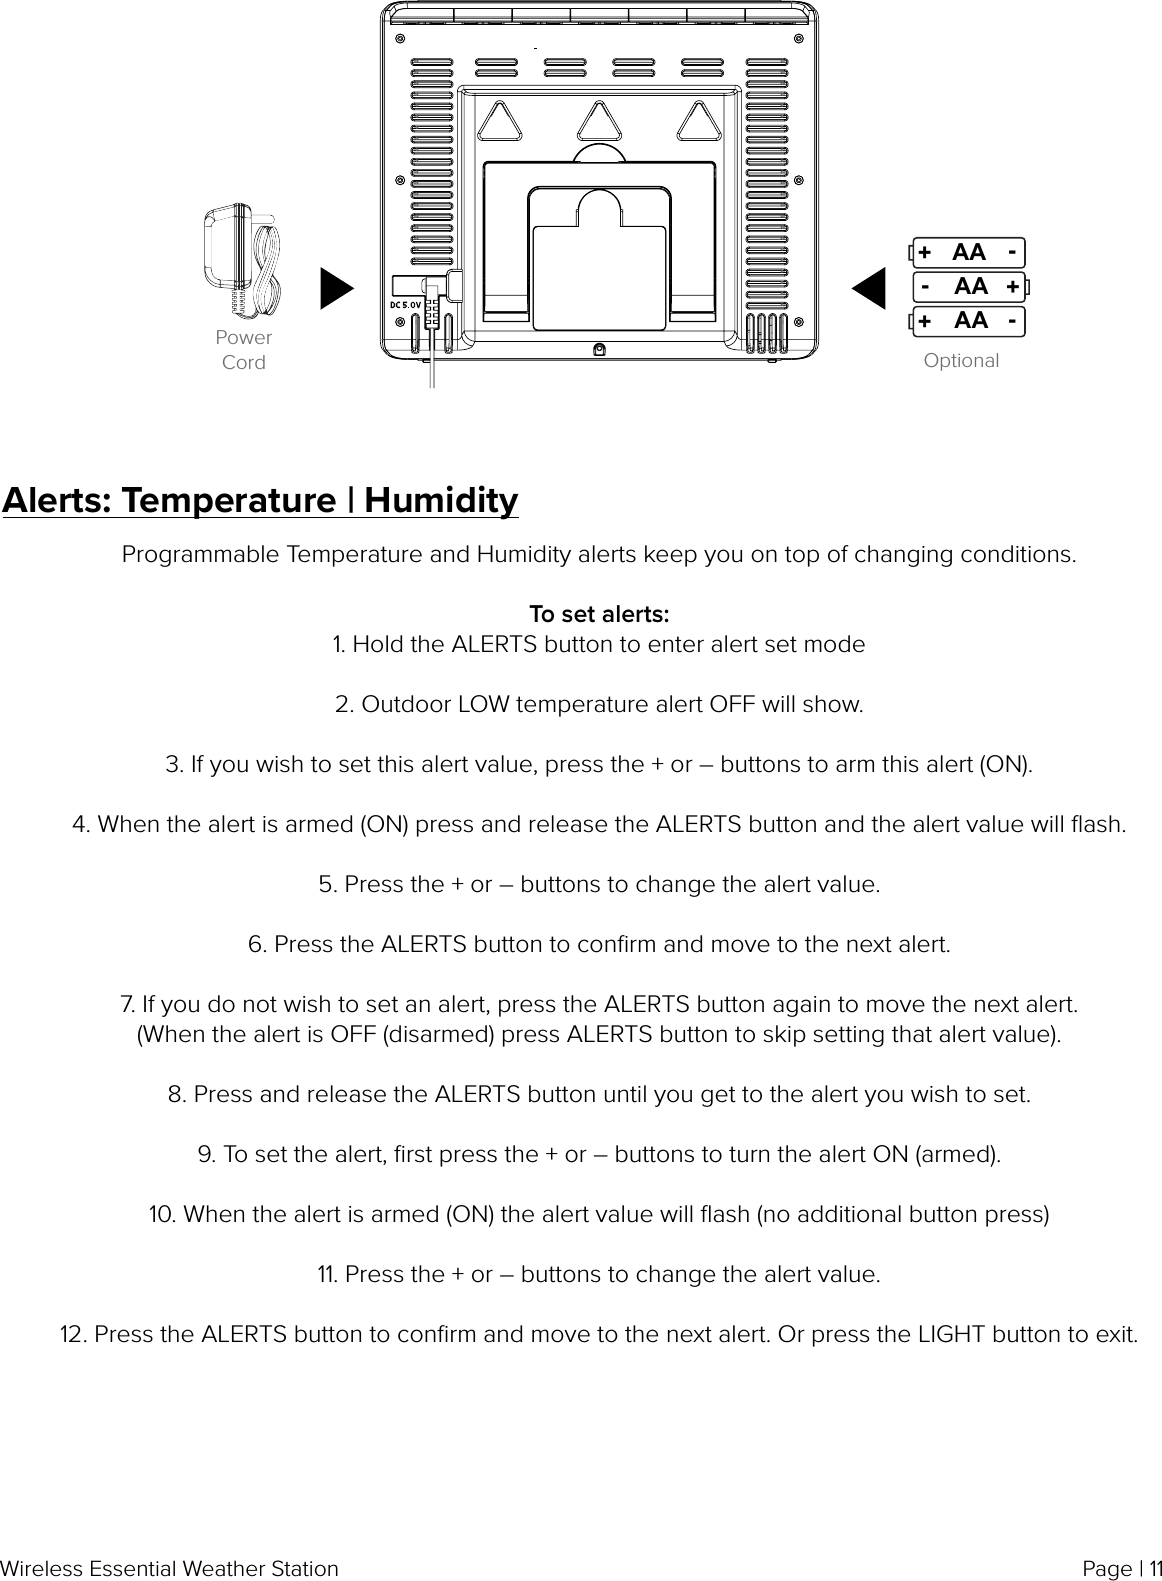 Page | 11Wireless Essential Weather StationOptionalPower CordAAAA+-AA+-+-Alerts: Temperature | HumidityProgrammable Temperature and Humidity alerts keep you on top of changing conditions.To set alerts:1. Hold the ALERTS button to enter alert set mode2. Outdoor LOW temperature alert OFF will show.3. If you wish to set this alert value, press the + or – buttons to arm this alert (ON).4. When the alert is armed (ON) press and release the ALERTS button and the alert value will ﬂash.5. Press the + or – buttons to change the alert value.6. Press the ALERTS button to conﬁrm and move to the next alert.7. If you do not wish to set an alert, press the ALERTS button again to move the next alert.(When the alert is OFF (disarmed) press ALERTS button to skip setting that alert value).8. Press and release the ALERTS button until you get to the alert you wish to set.9. To set the alert, ﬁrst press the + or – buttons to turn the alert ON (armed).10. When the alert is armed (ON) the alert value will ﬂash (no additional button press)11. Press the + or – buttons to change the alert value.12. Press the ALERTS button to conﬁrm and move to the next alert. Or press the LIGHT button to exit.